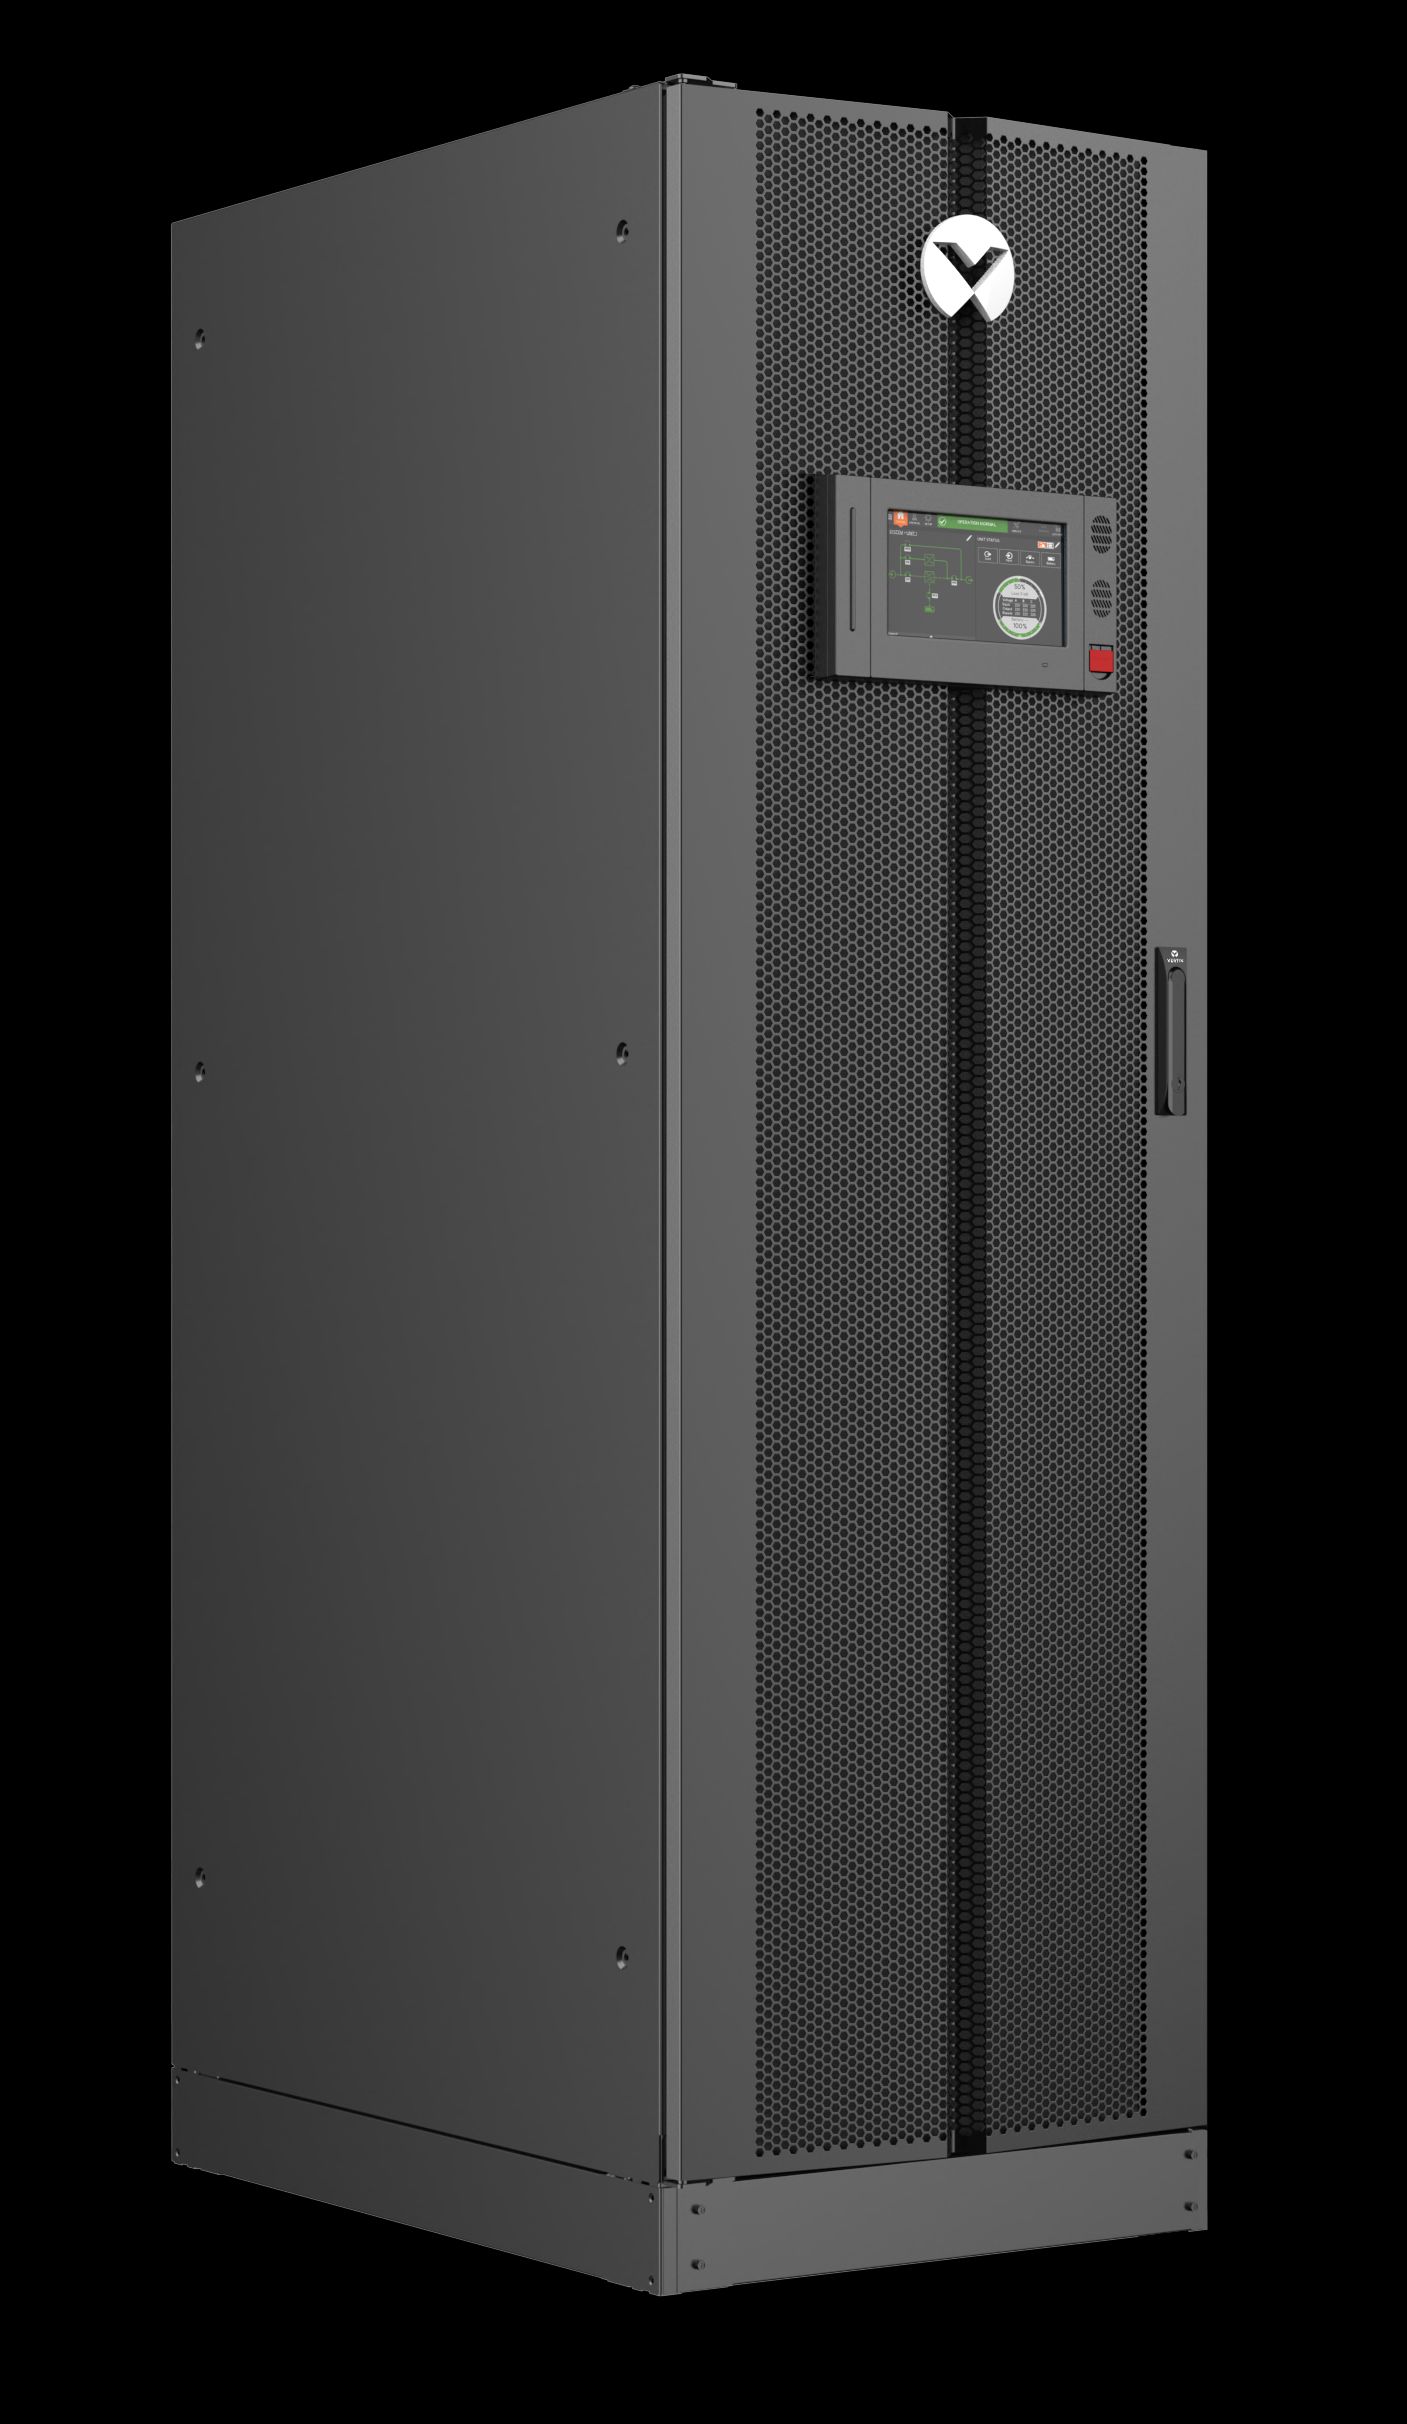 Vertiv Launches Energy-Efficient, Scalable UPS for Edge and Mid-Sized Applications in EMEA